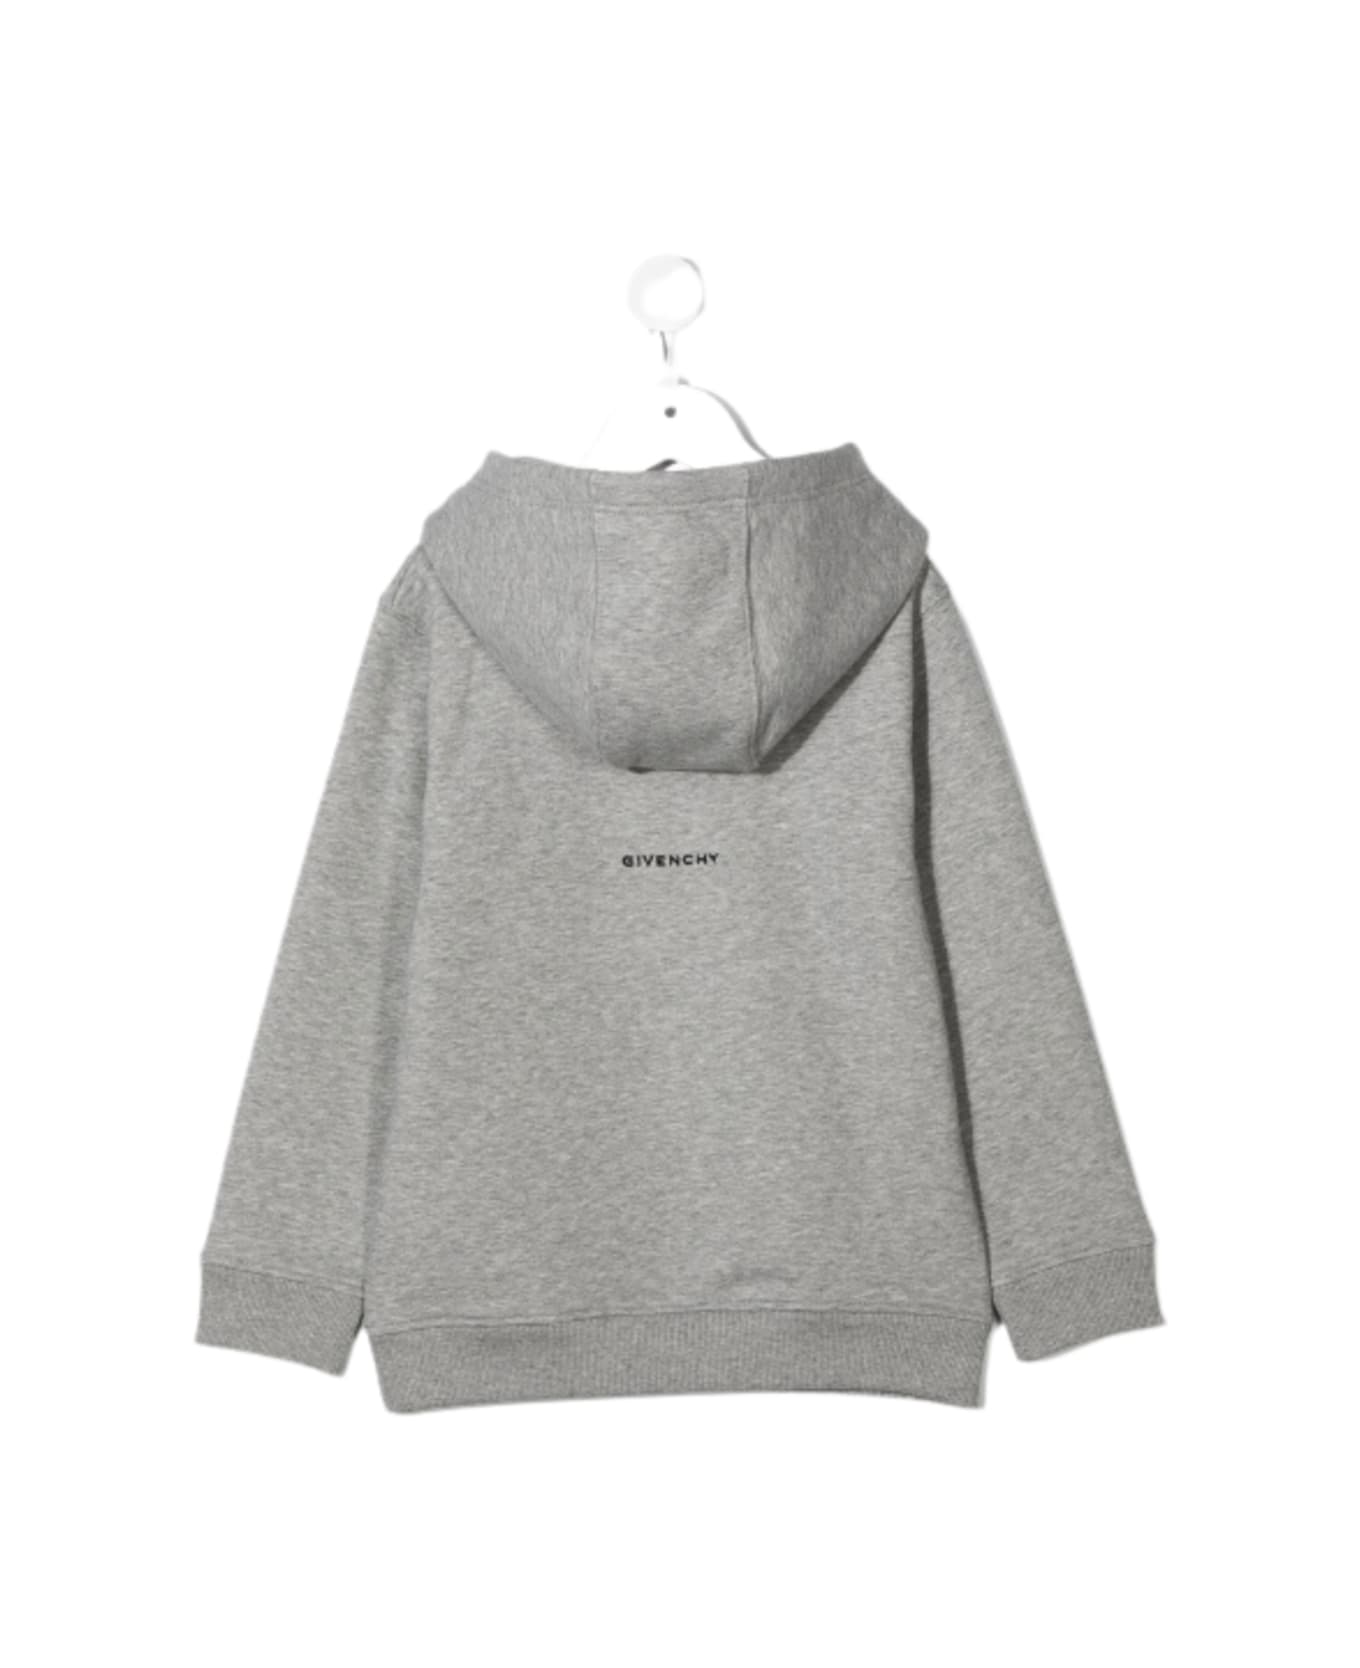 Givenchy Grey Jersey Hoodie With Graffiti Front Print Givenchy Kids Boy - Grey